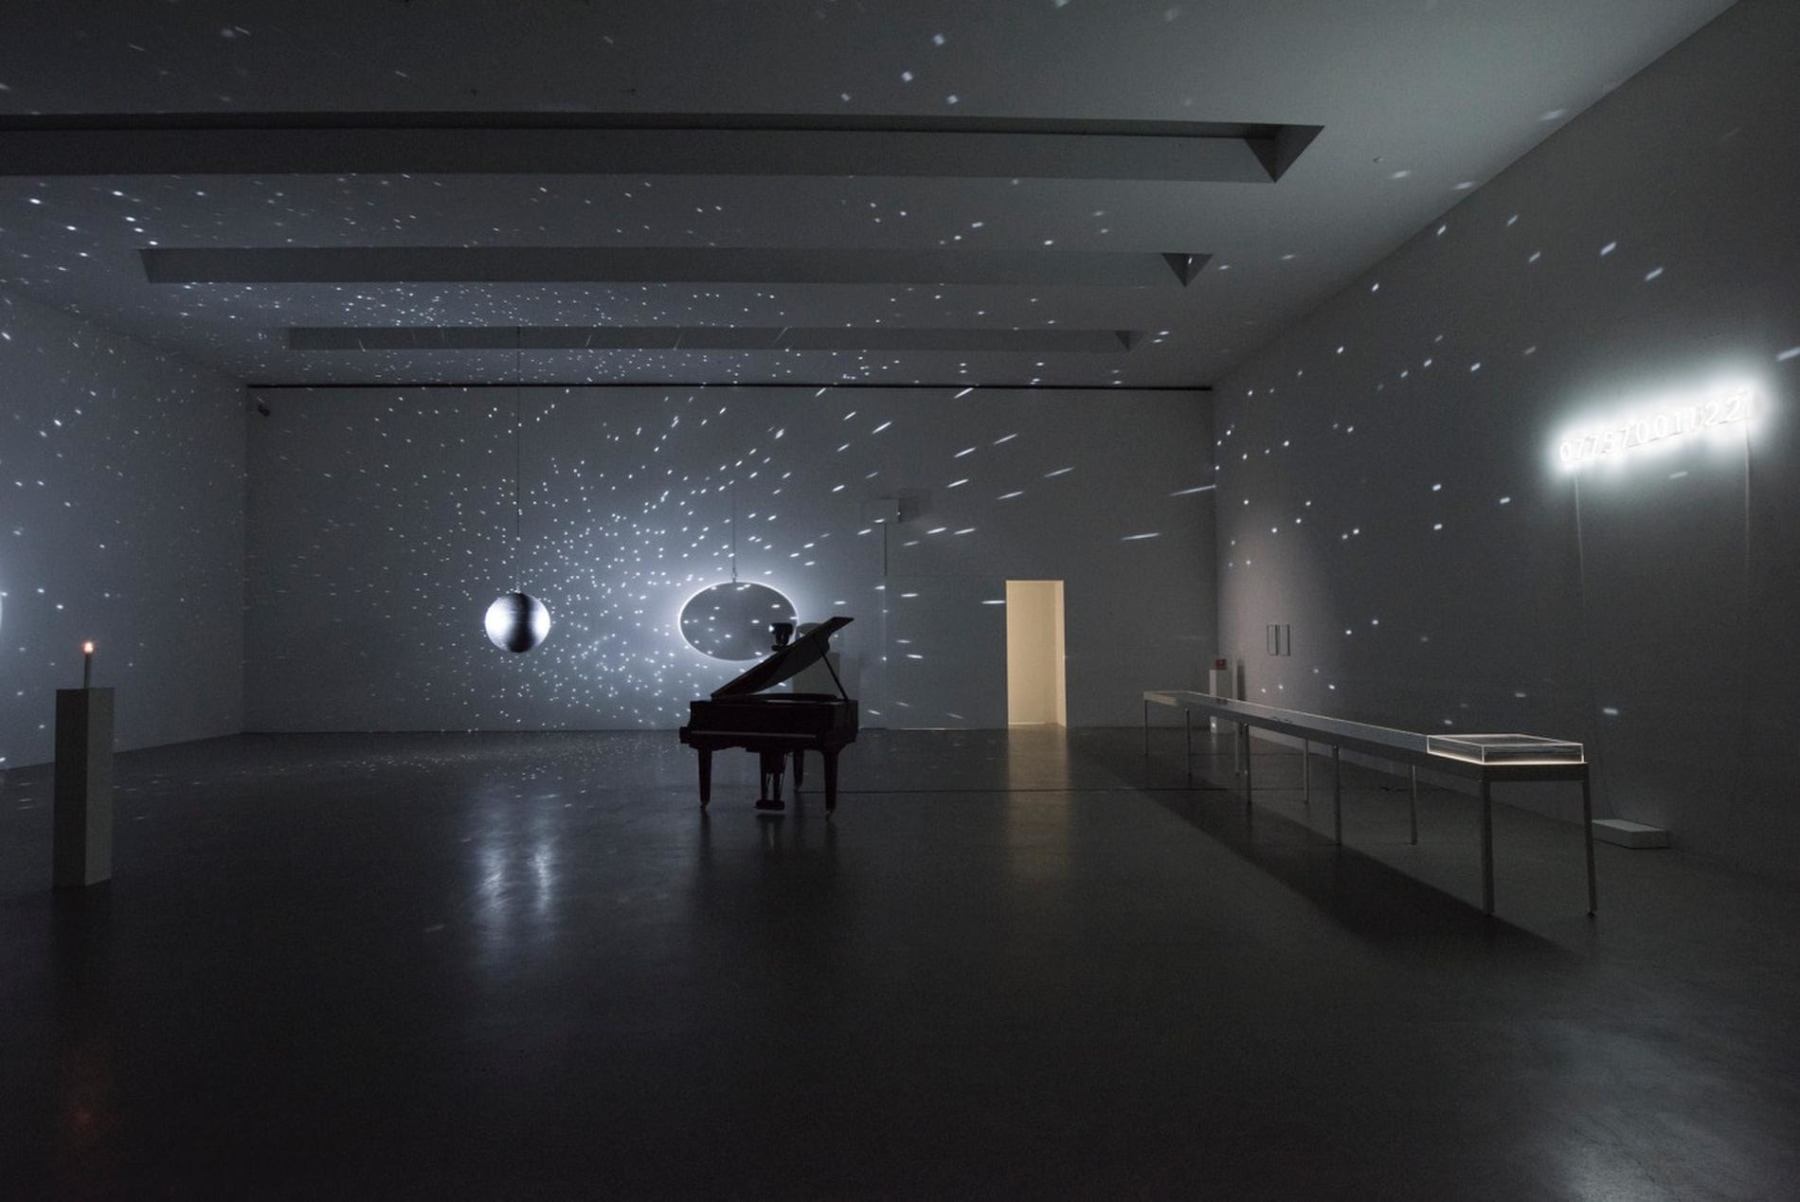 dark room with lights being flashed by a mirrorball, piano in the center